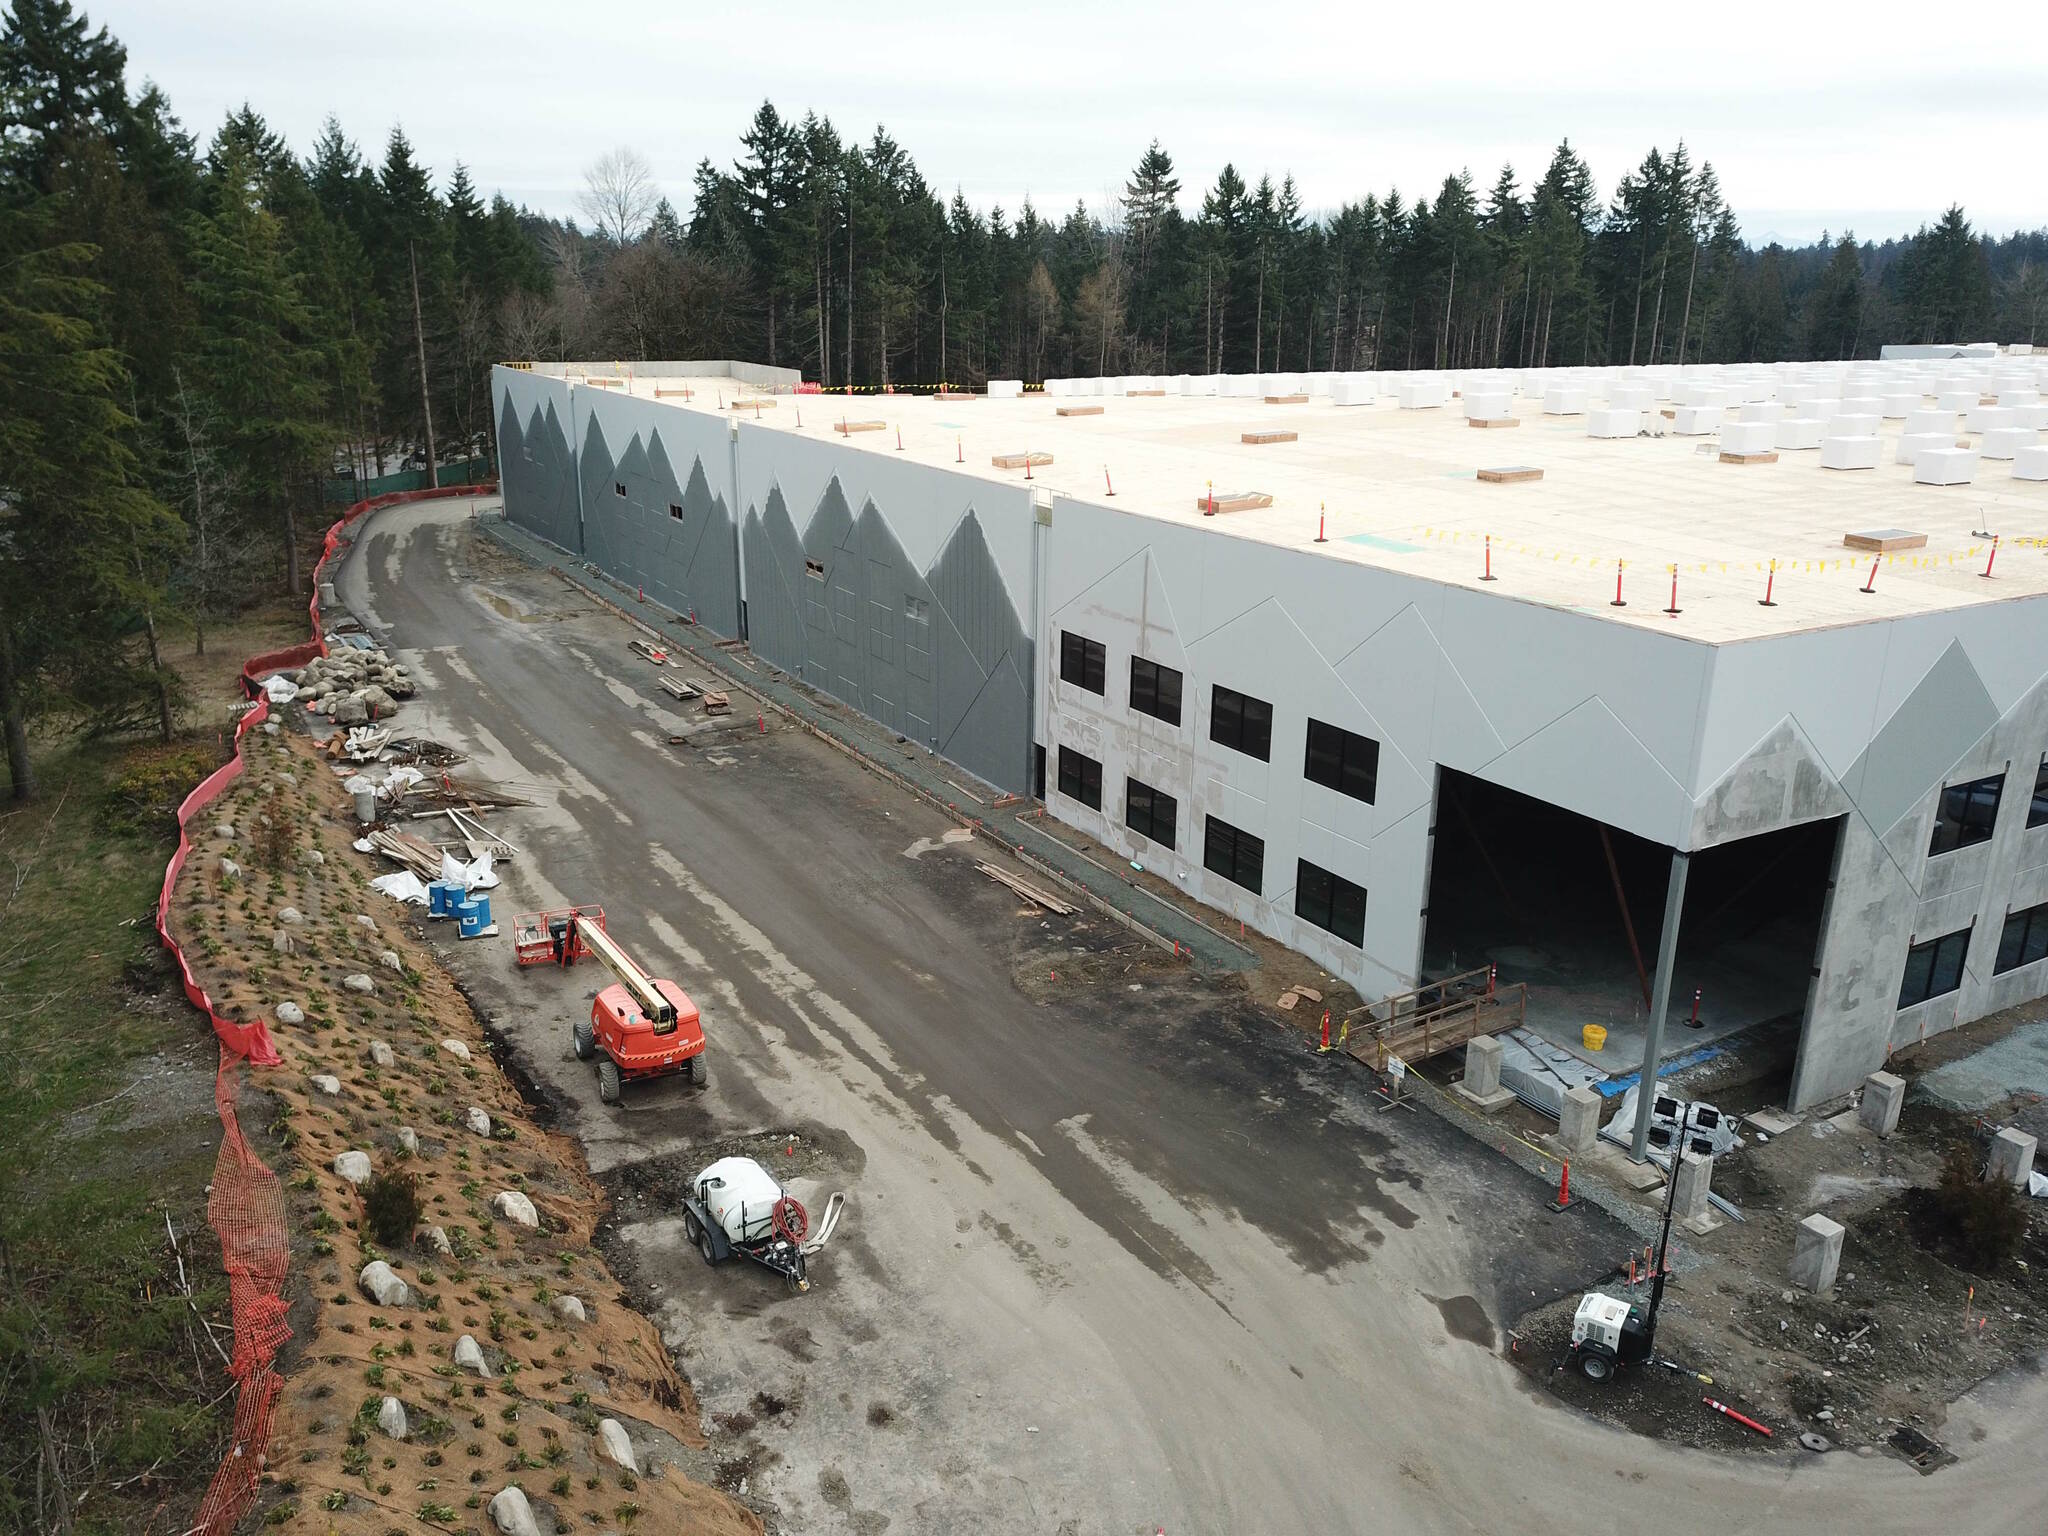 Photo by Bruce Honda
Buildings A and B of Woodbridge’s campus plan on the former Weyerhaeuser campus are projected to come online this year.